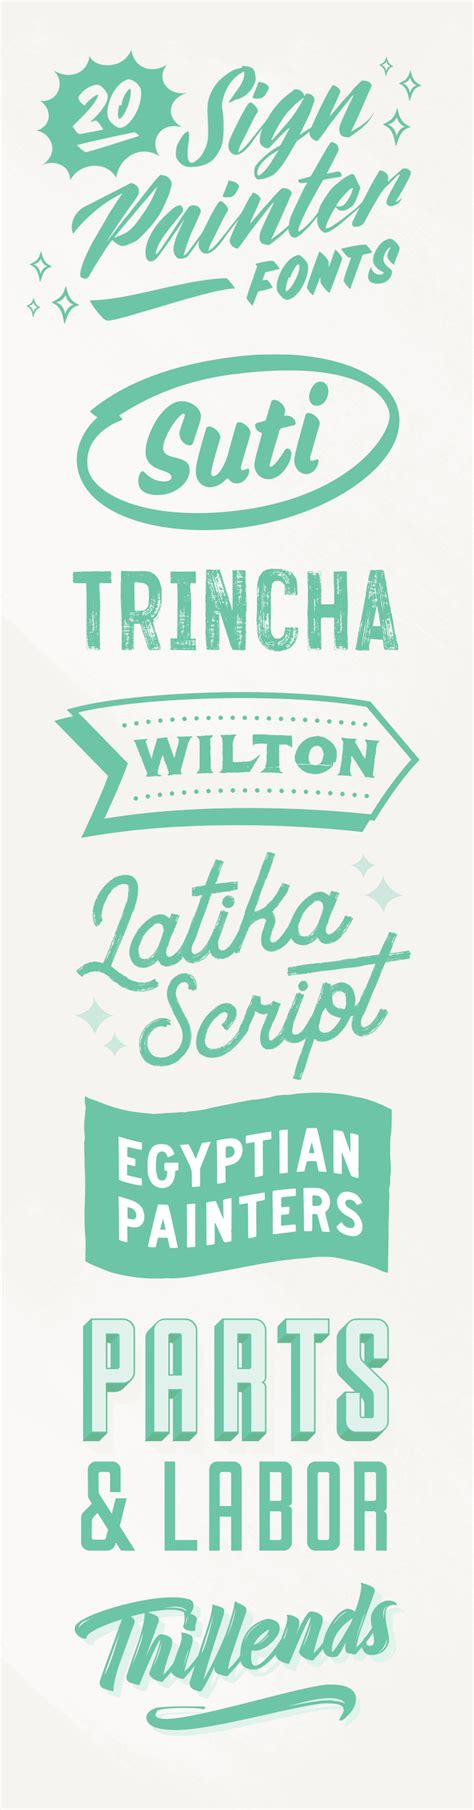 20 Sign Painter Fonts to Create Labels, Signs, and Cards - Creative Market Blog